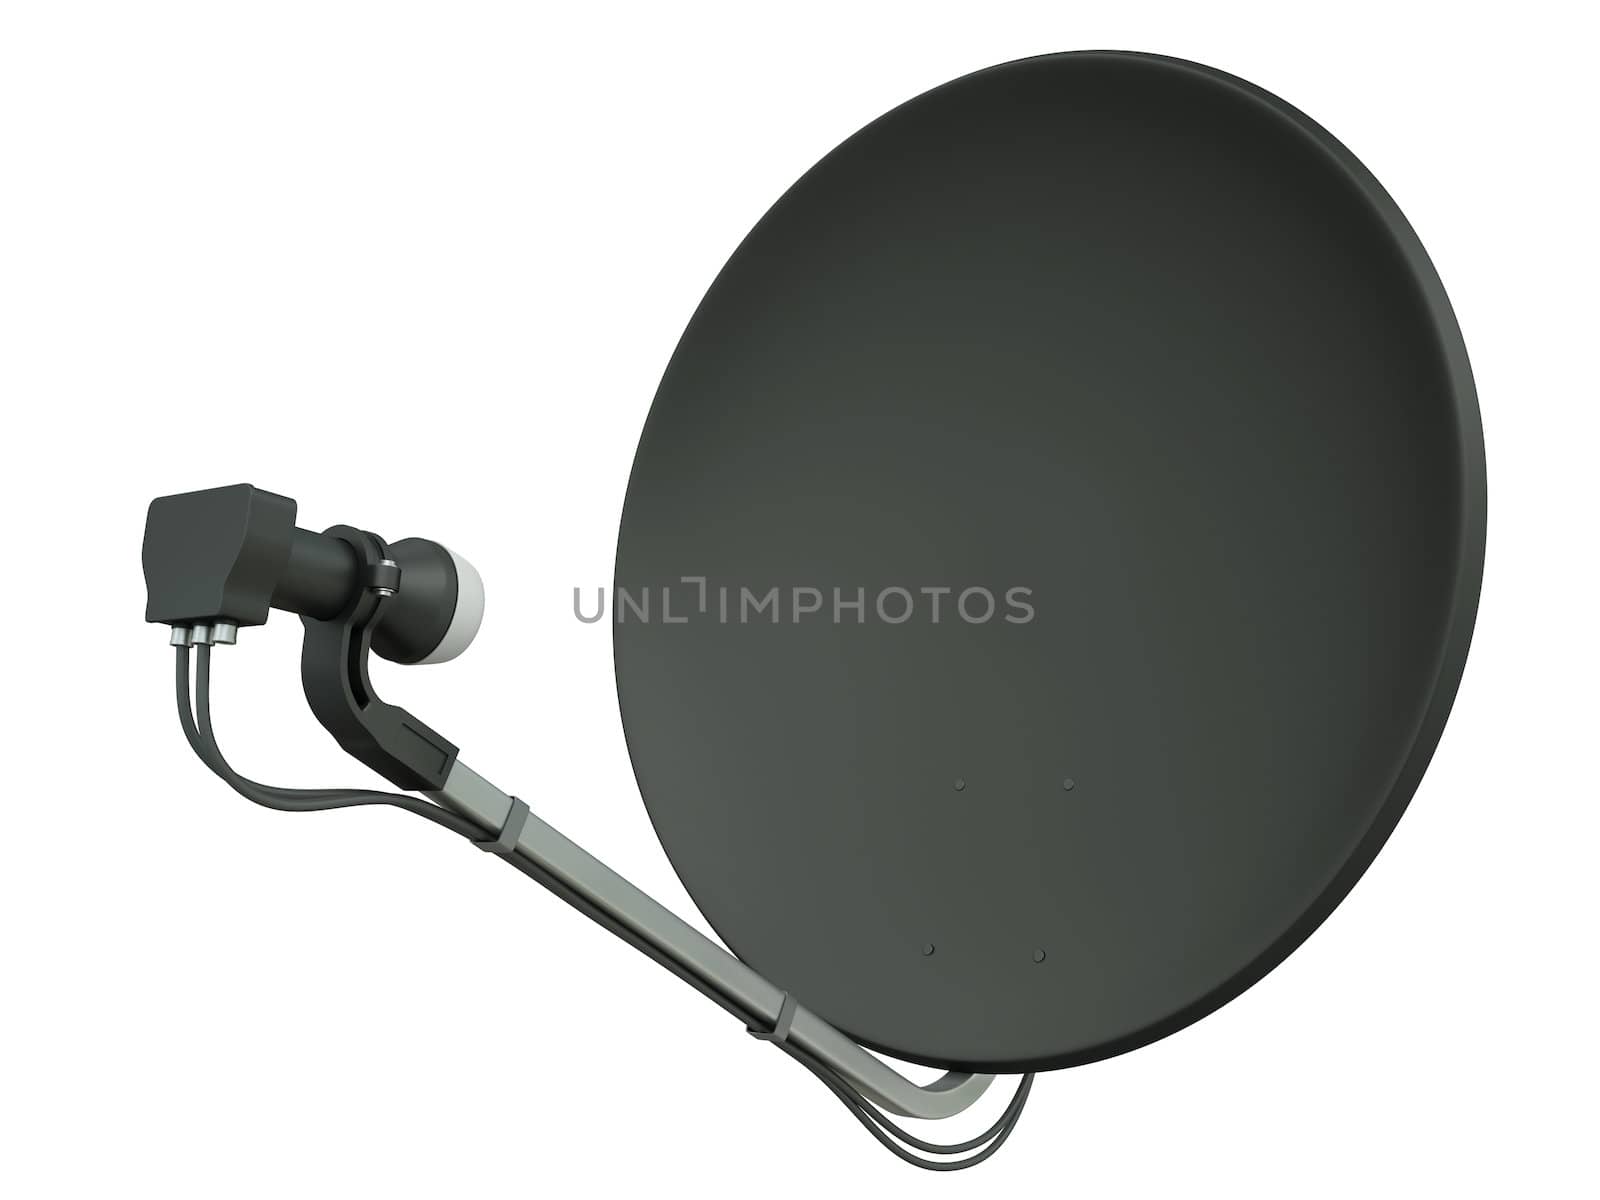 Black satellite dish isolated on a white background. 3D render.